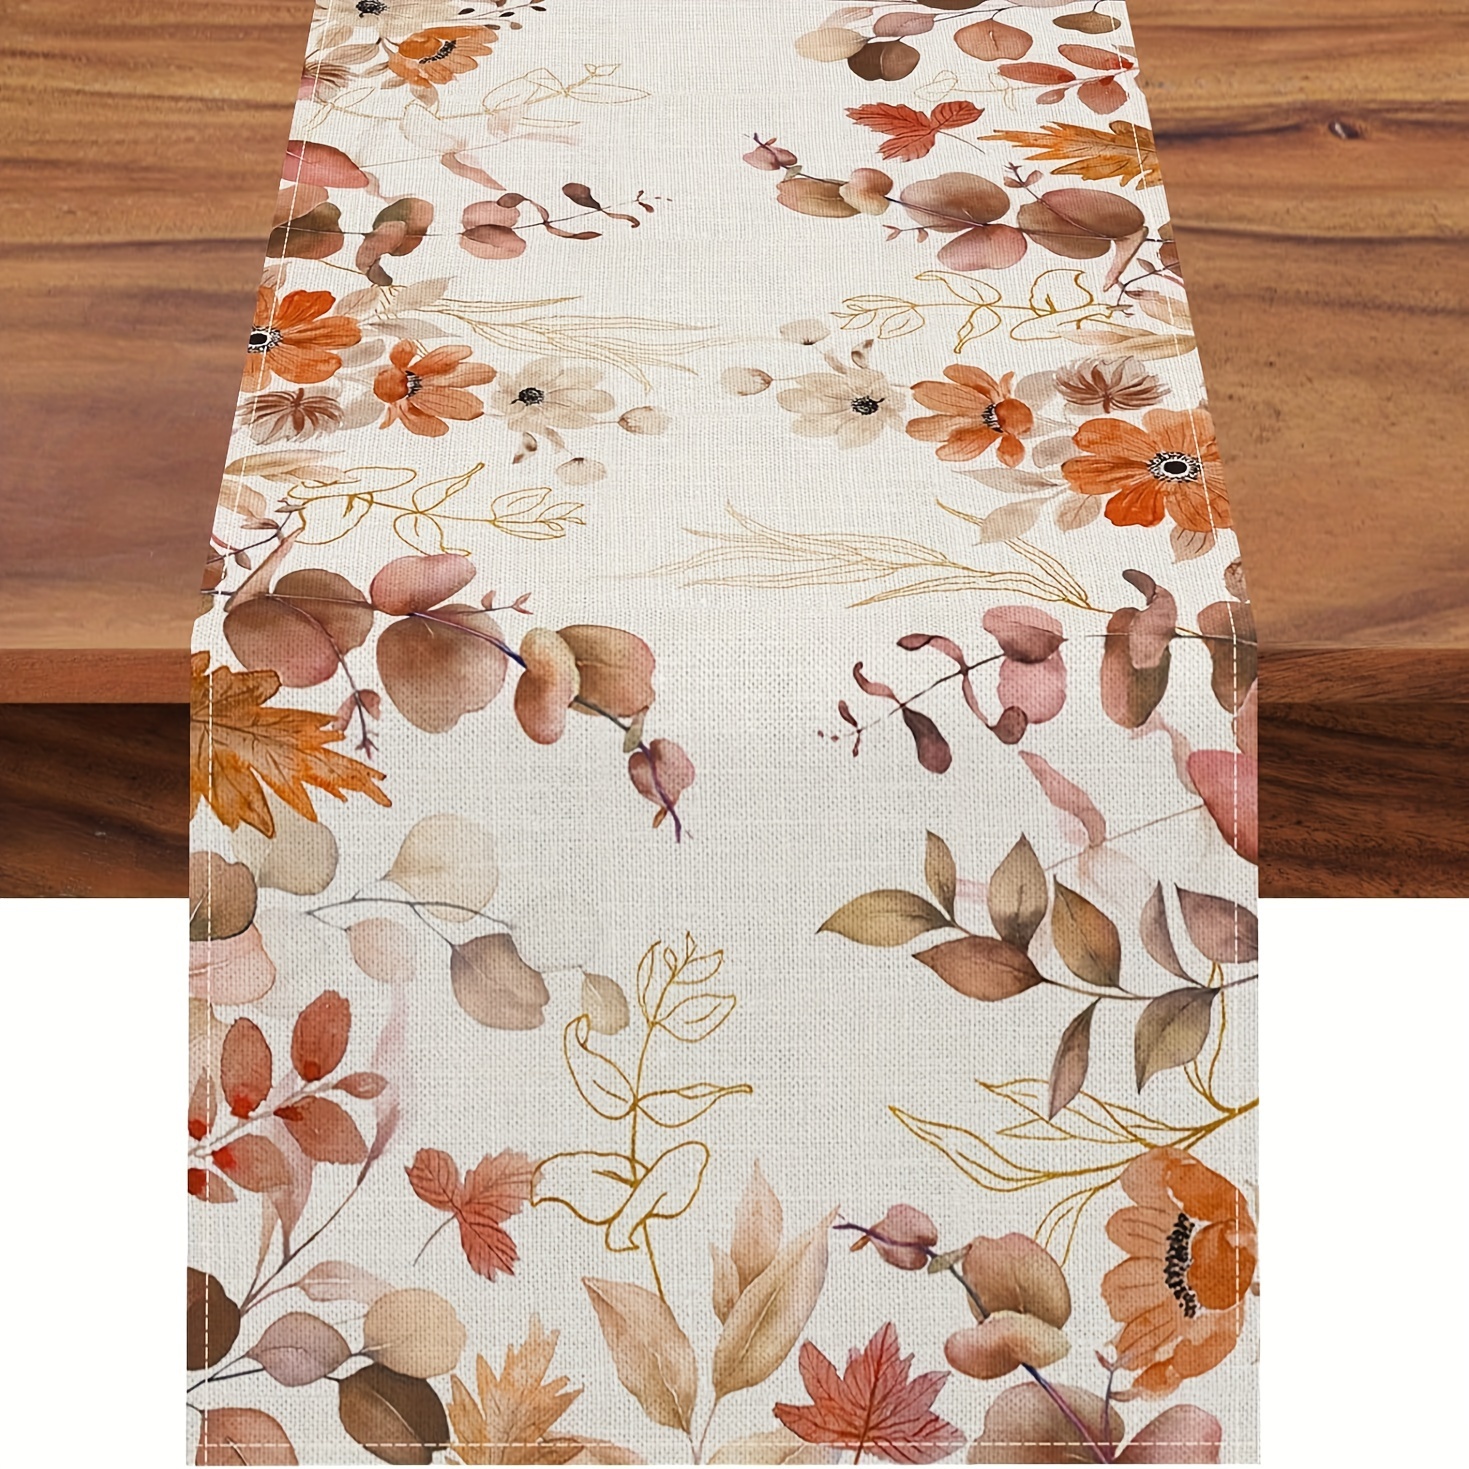 

1pc, Table Runner, Floral Table Runner, Fall Series Decorative Table Runner, For Living Room Dining Party, Polyester Fabric, 13x72 Inch/ 33x183 Cm, Home Decor